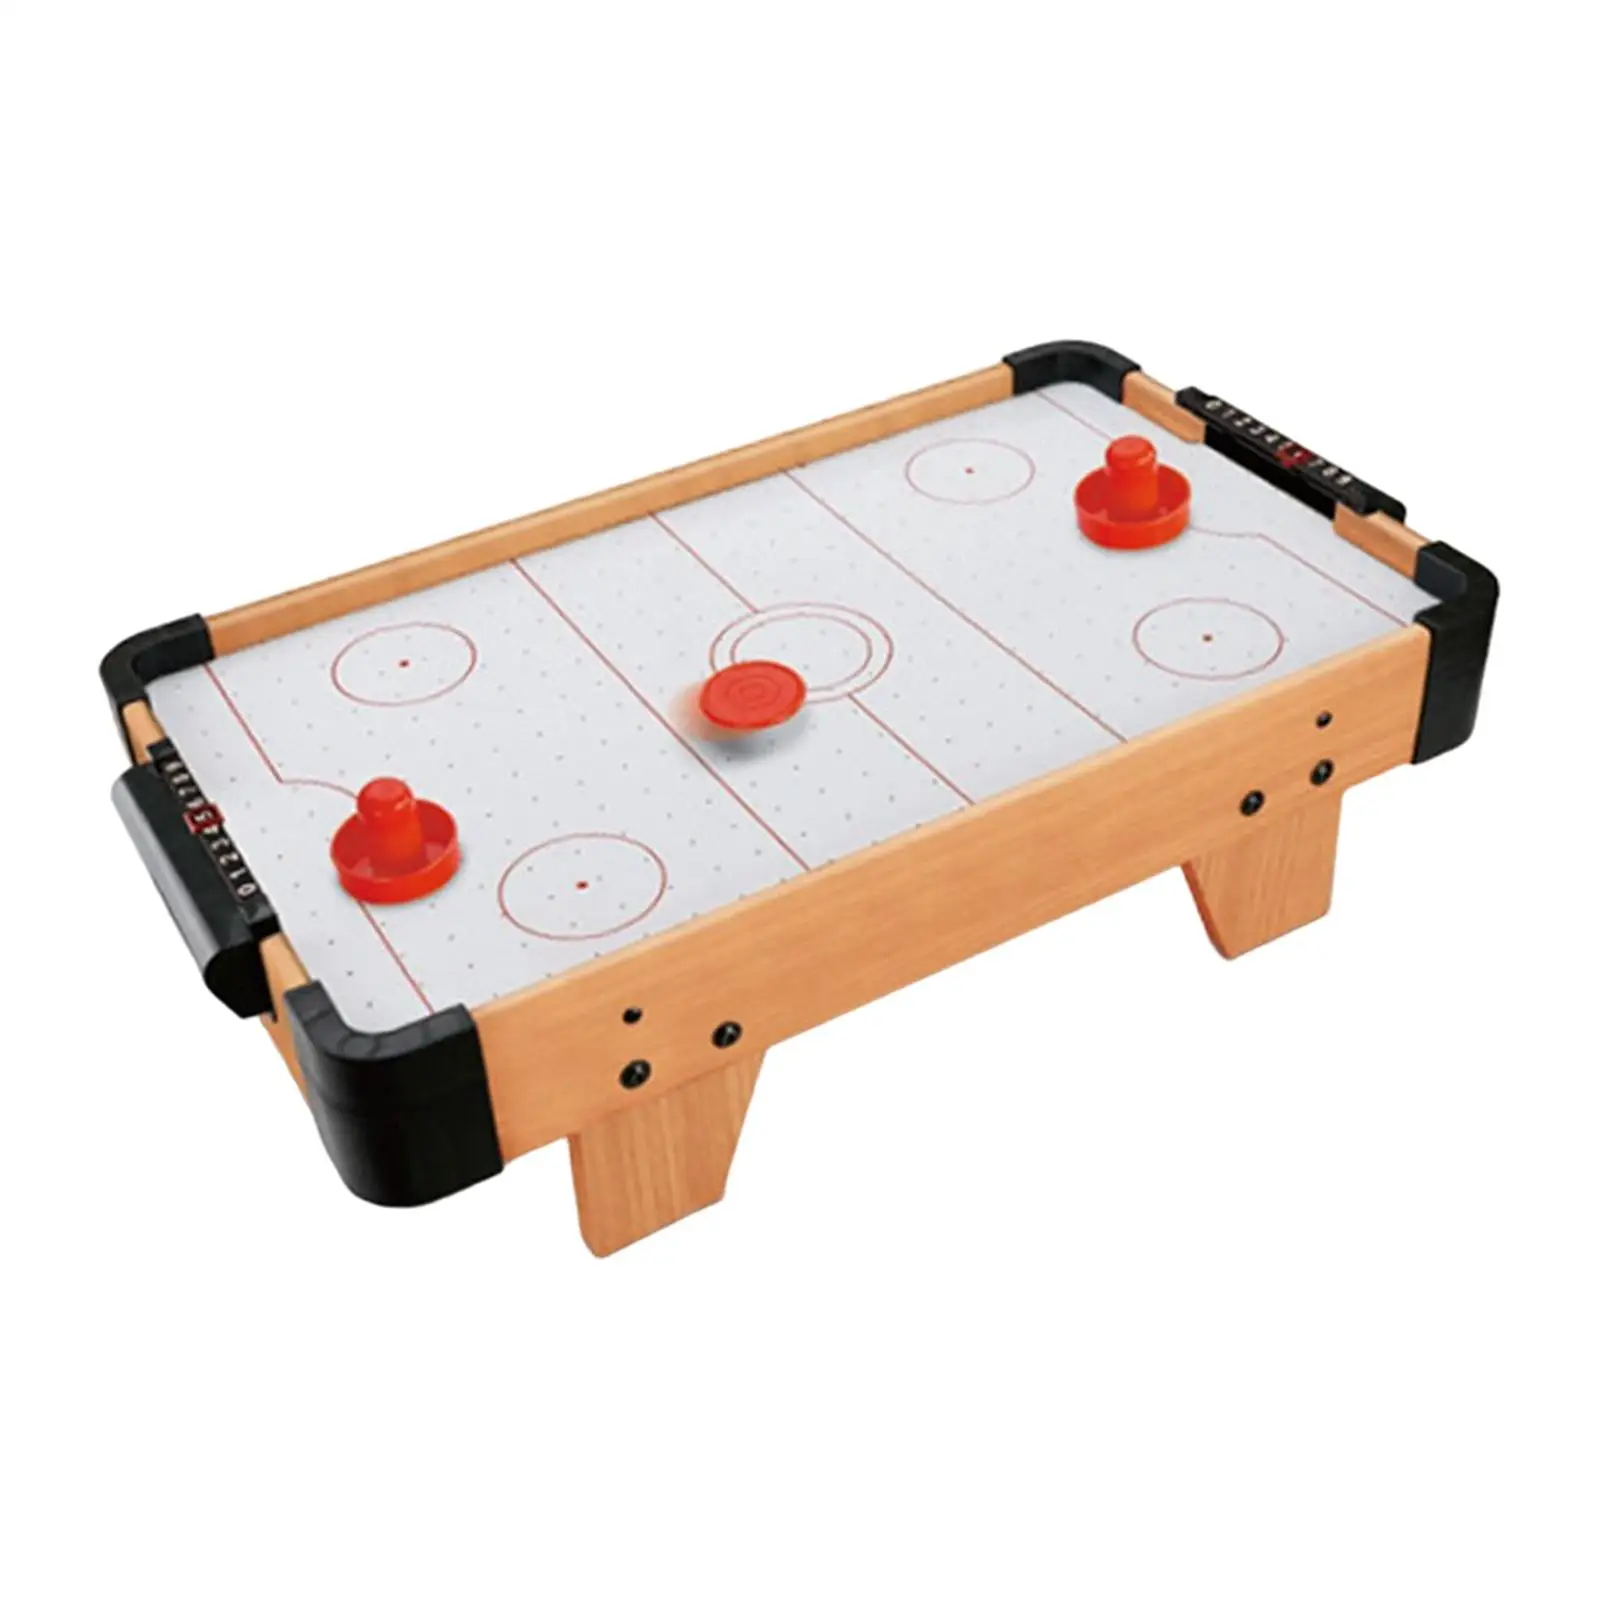 Air Hockey Table Paced Winner Board Game Family Game Parent Child Interactive with Sliders and Pucks for Girls Boys Kids Adults